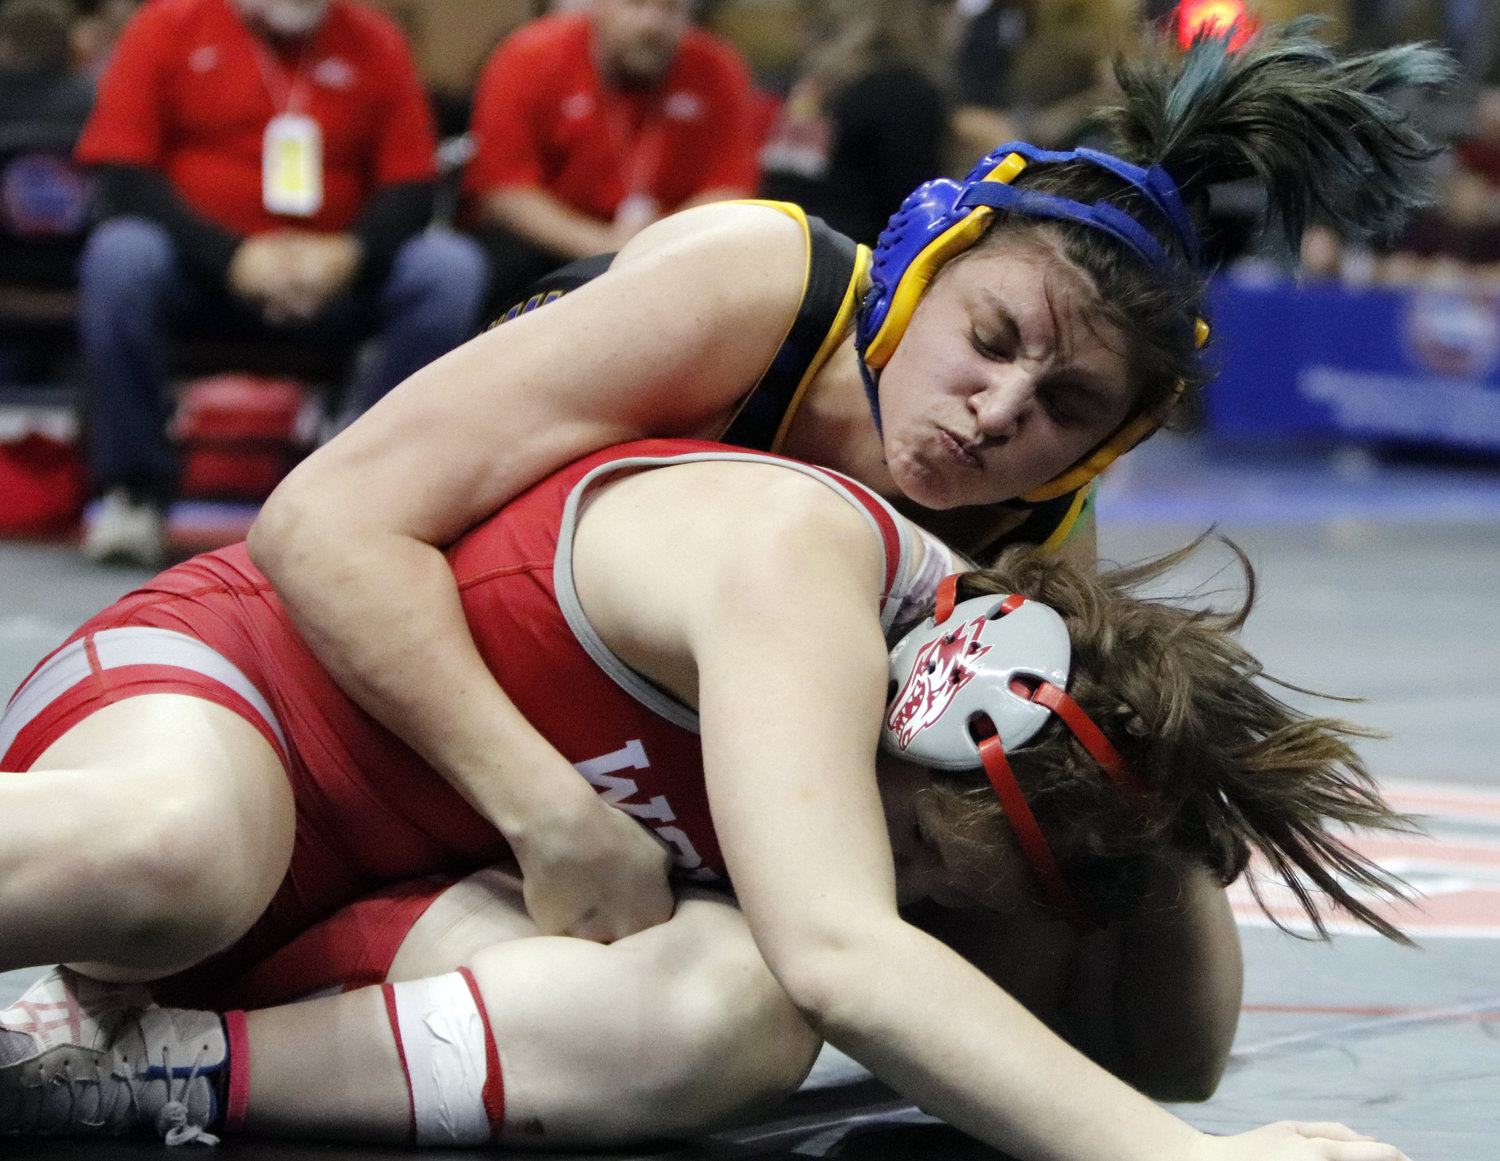 Wright City sophomore Caelyn Hanff (top) maintains control of Reeds Spring wrestler Blaiklee Cagle during her quarterfinal match.